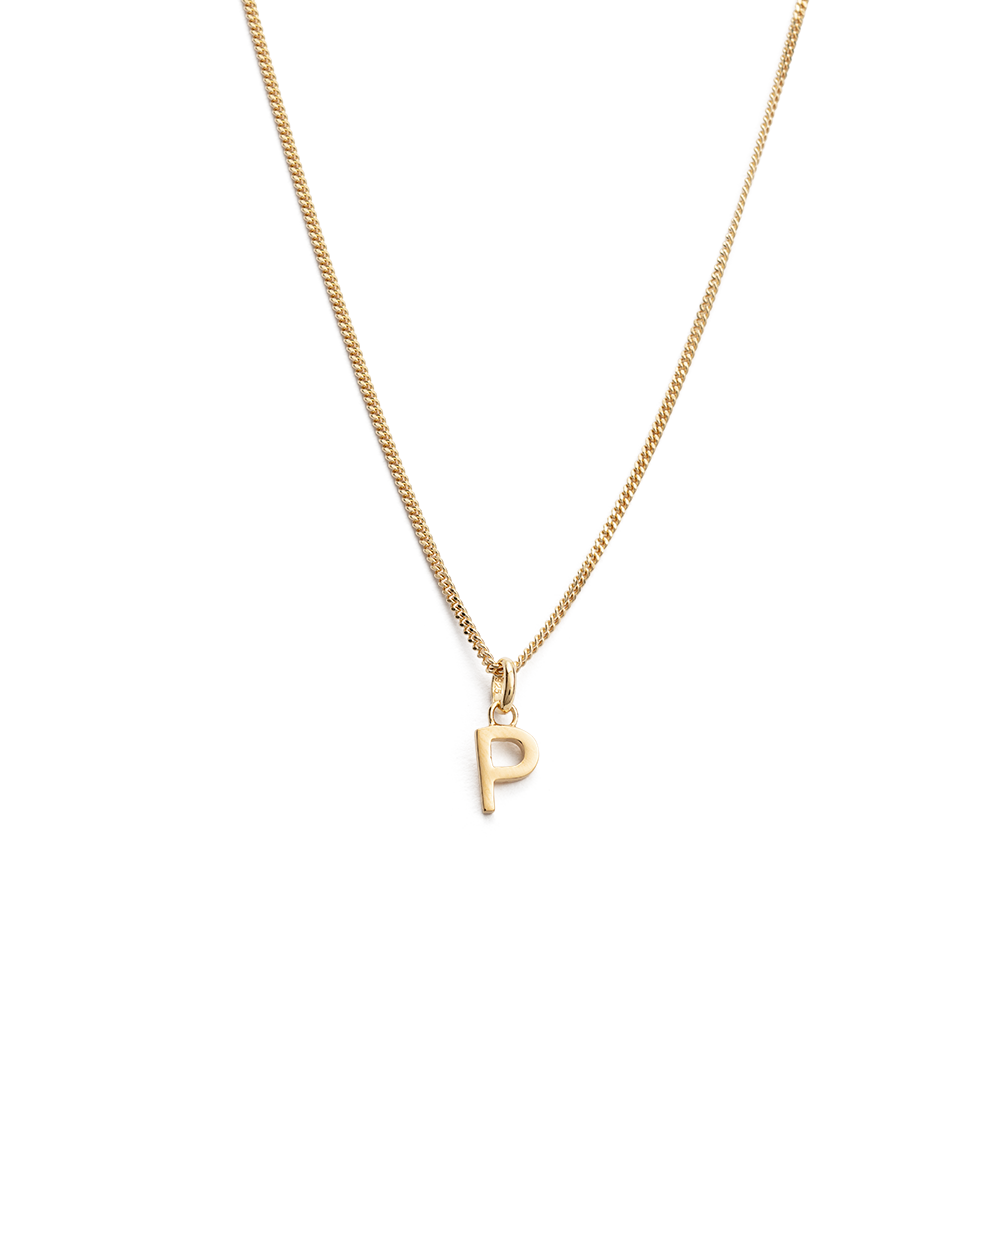 Curly Molten Initial Pendant Necklace - Initial C | 18ct Gold Plated  Vermeil | Initial pendant necklace, Initial pendant, Initial necklace